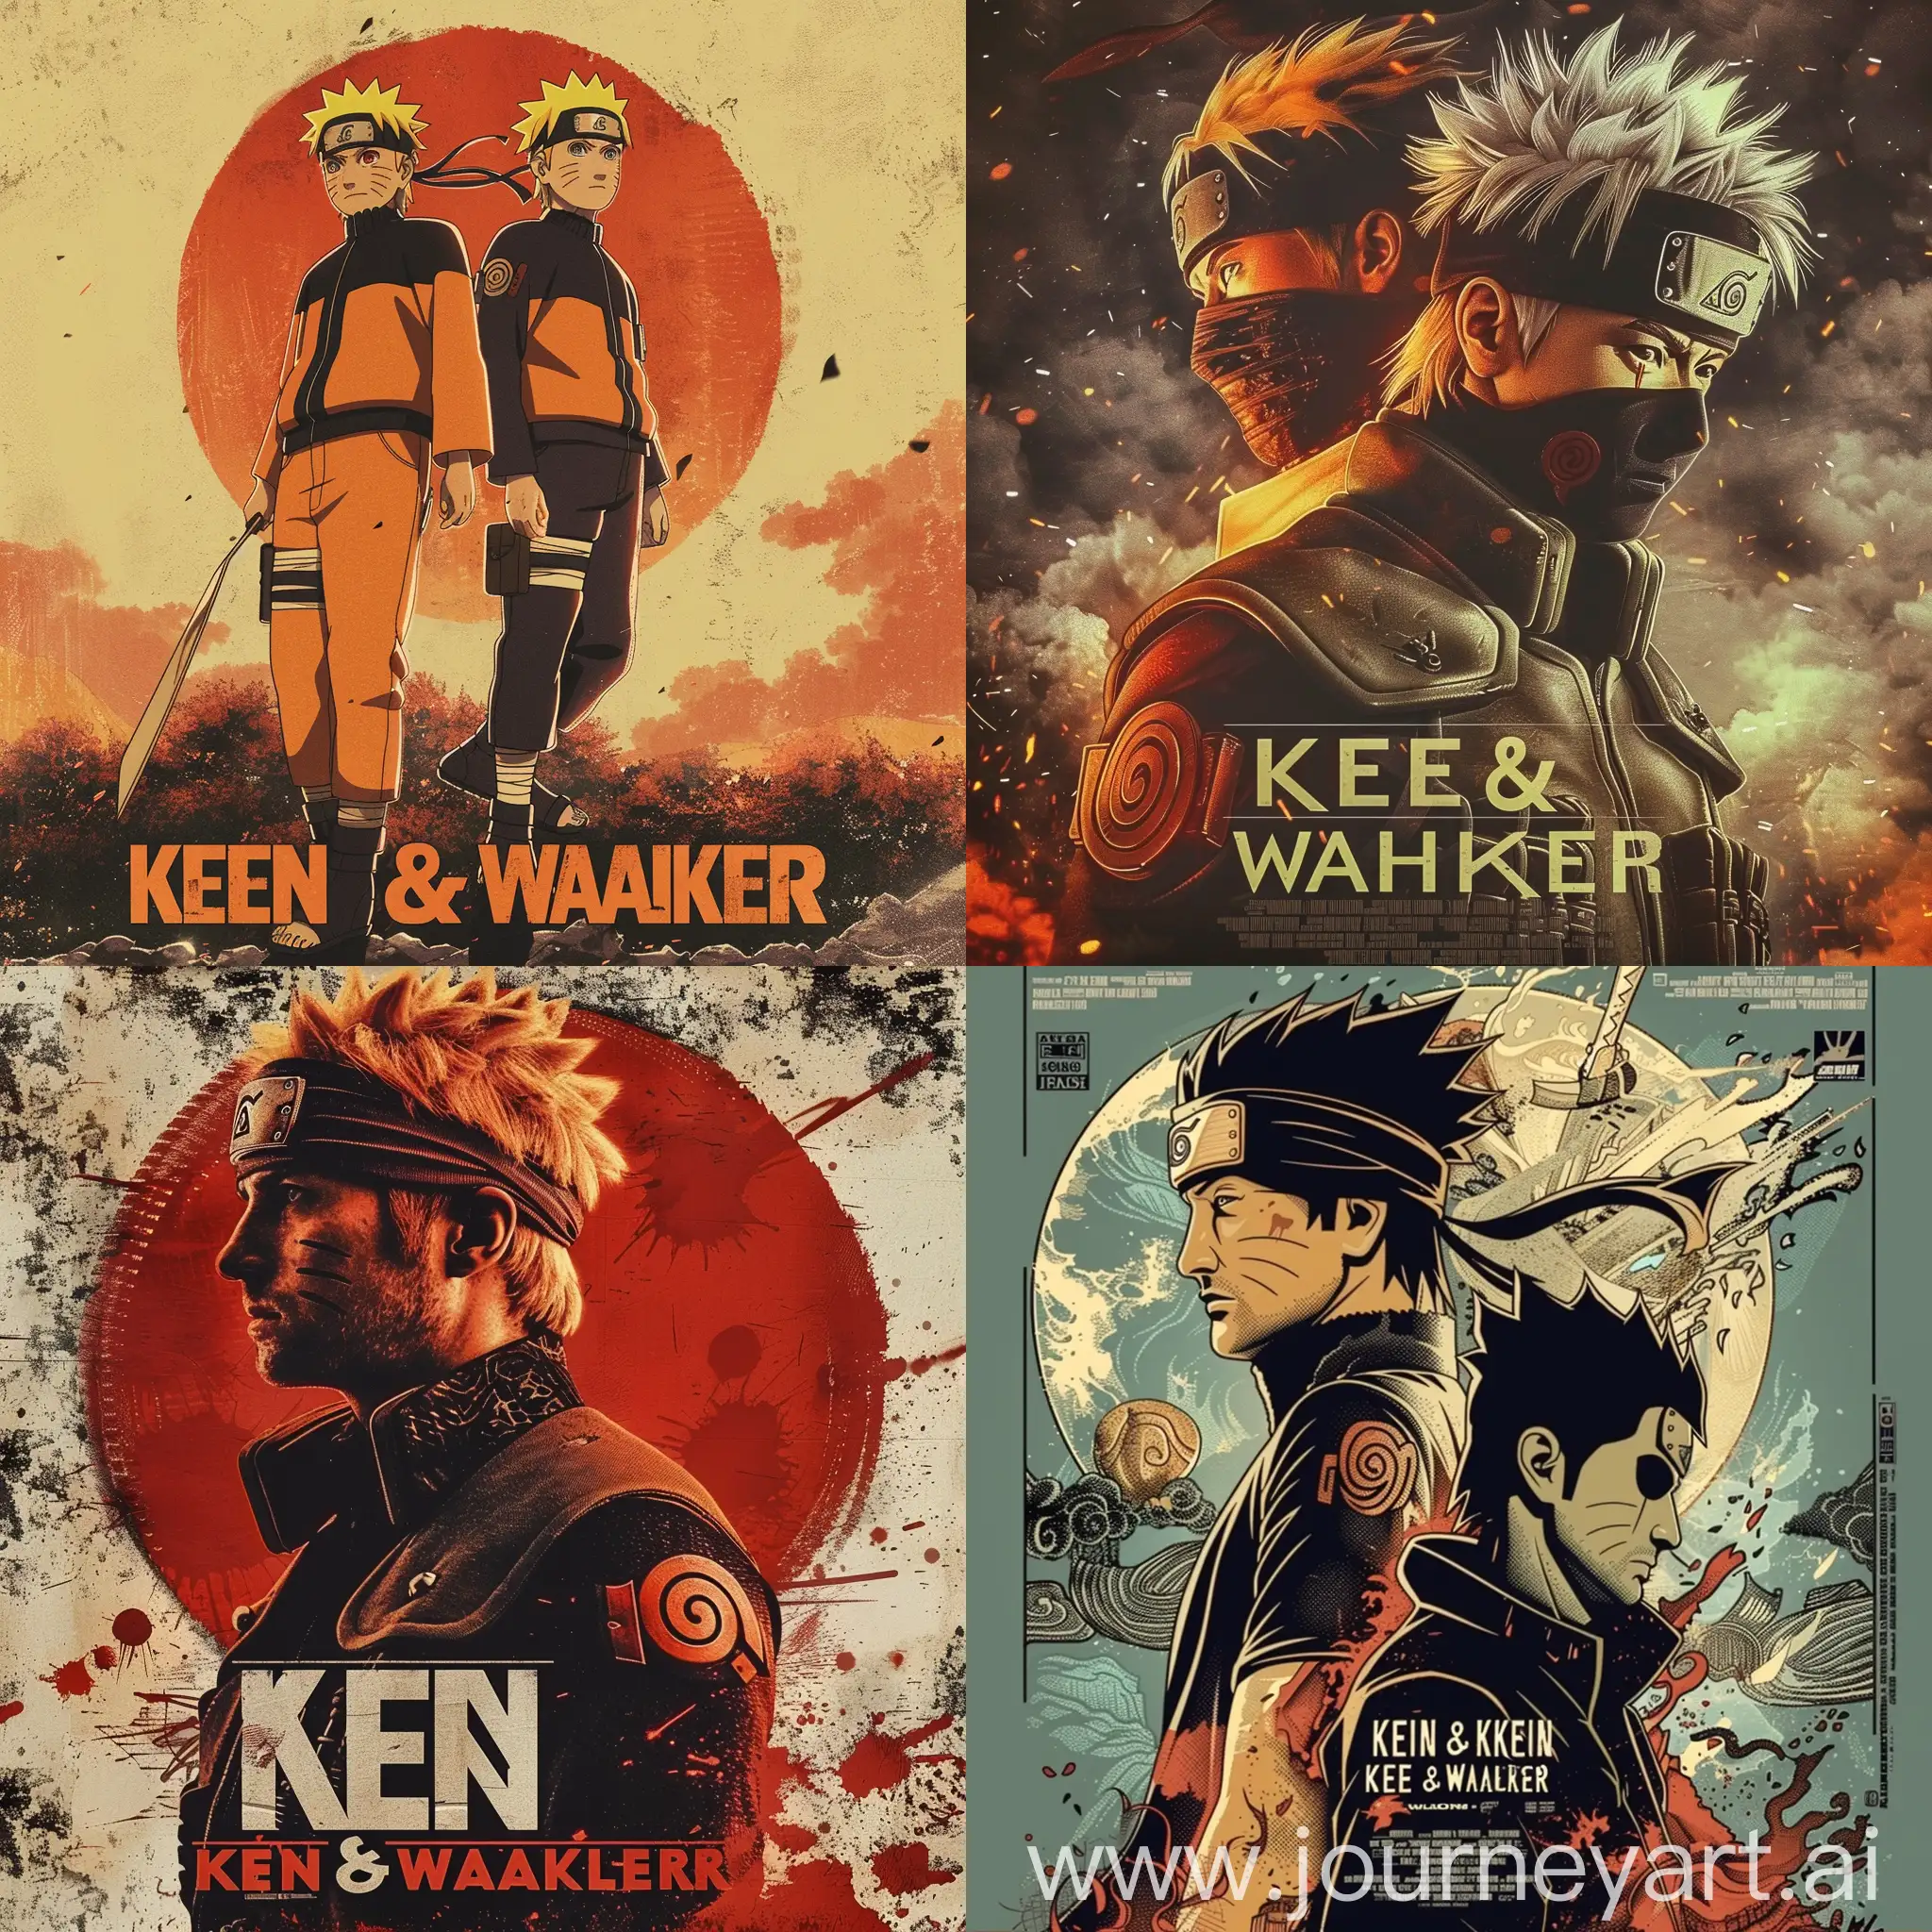 Typographic-Animation-Poster-KEINWALKER-featuring-Naruto-in-Retro-Style